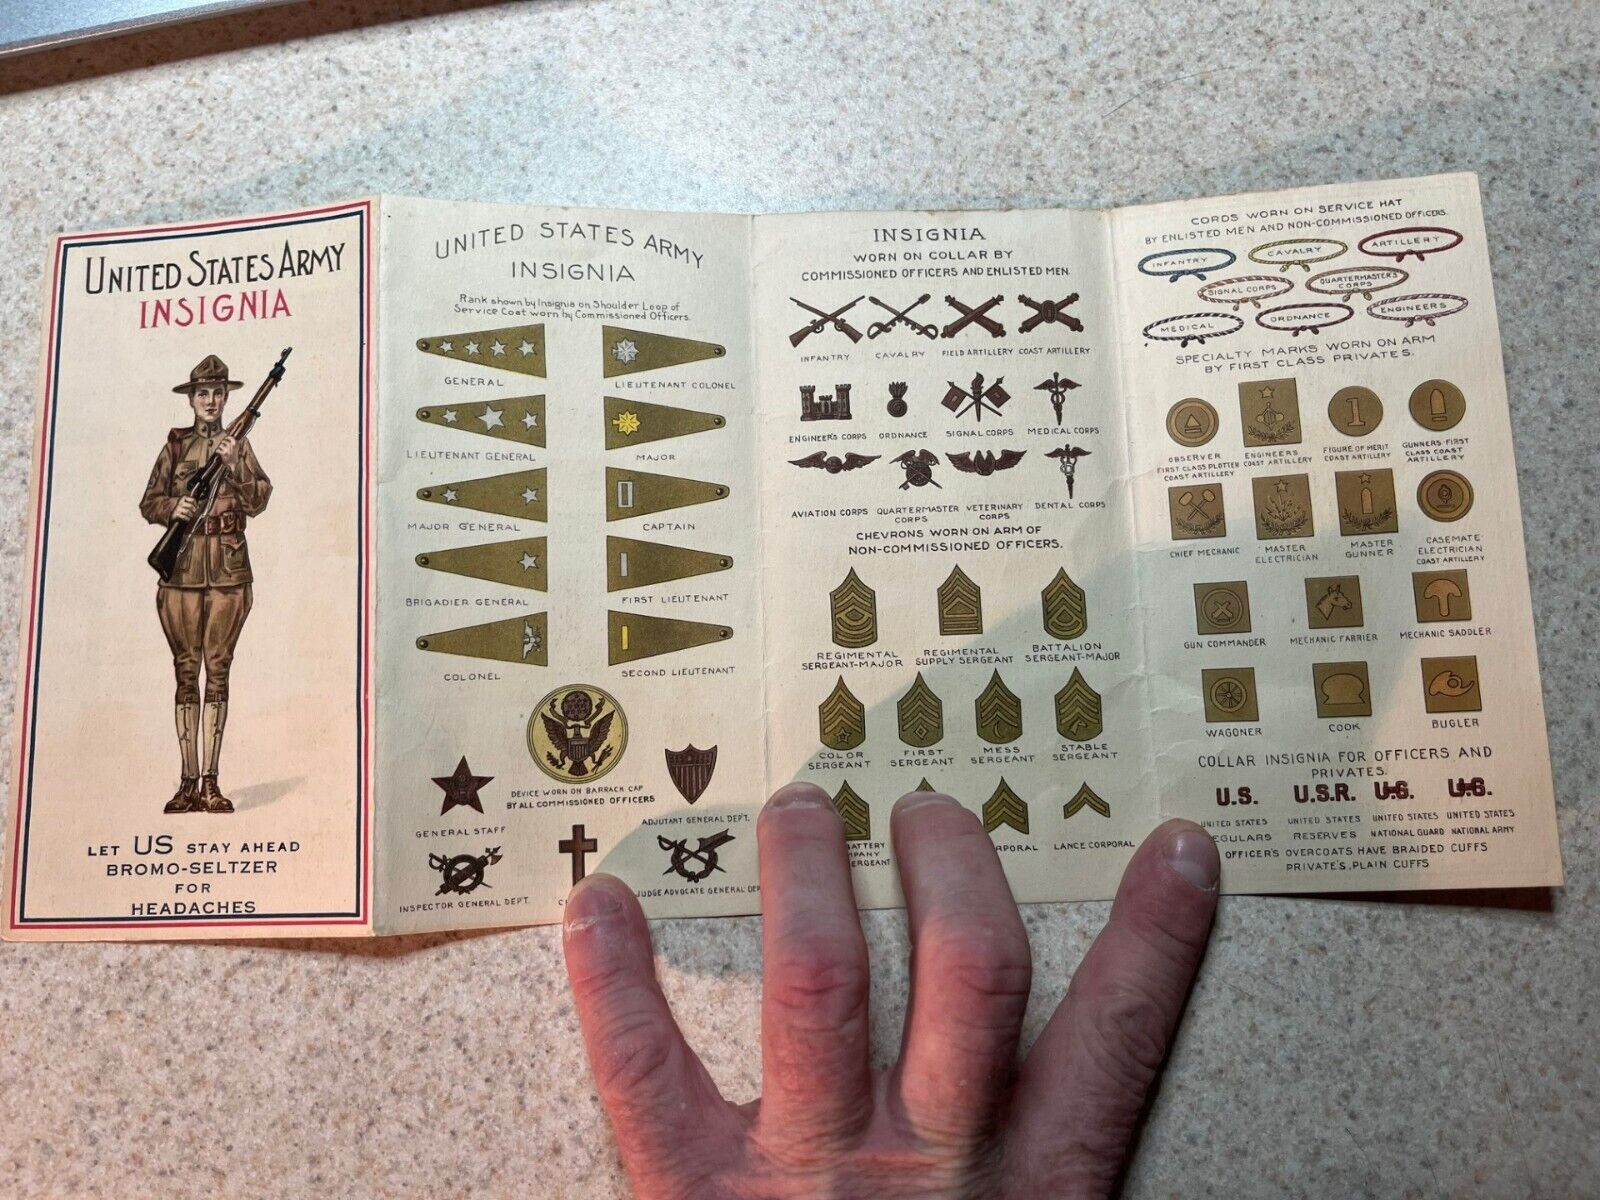 WW1 ARMY & NAVY INSIGNIA PAMPHLET, BROMO-SELTZER FOR HEADACHES